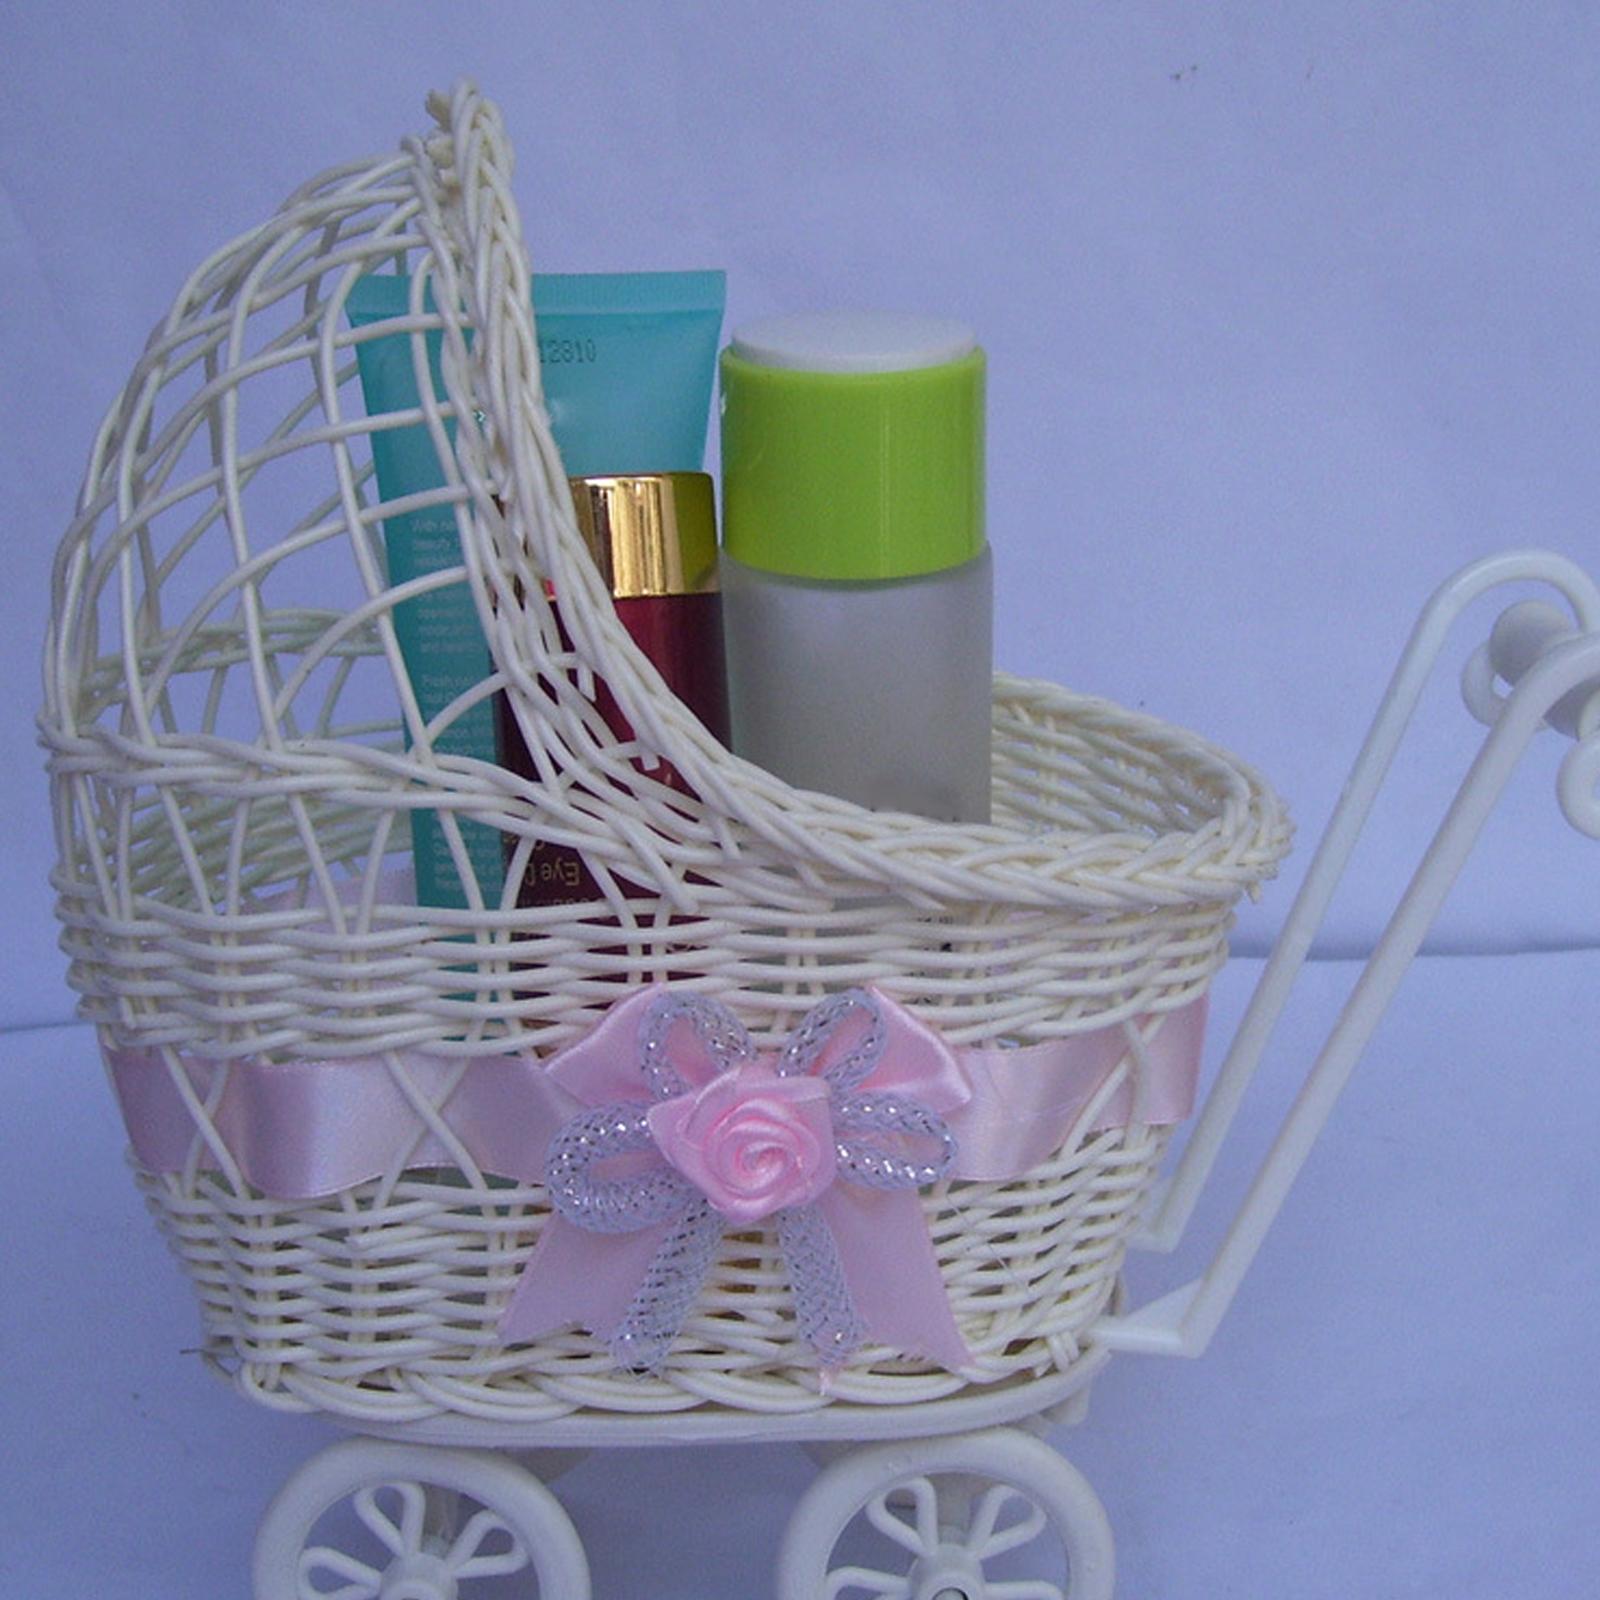 Hand Woven Storage Basket Portable Organiser Multifunctional for Cosmetic